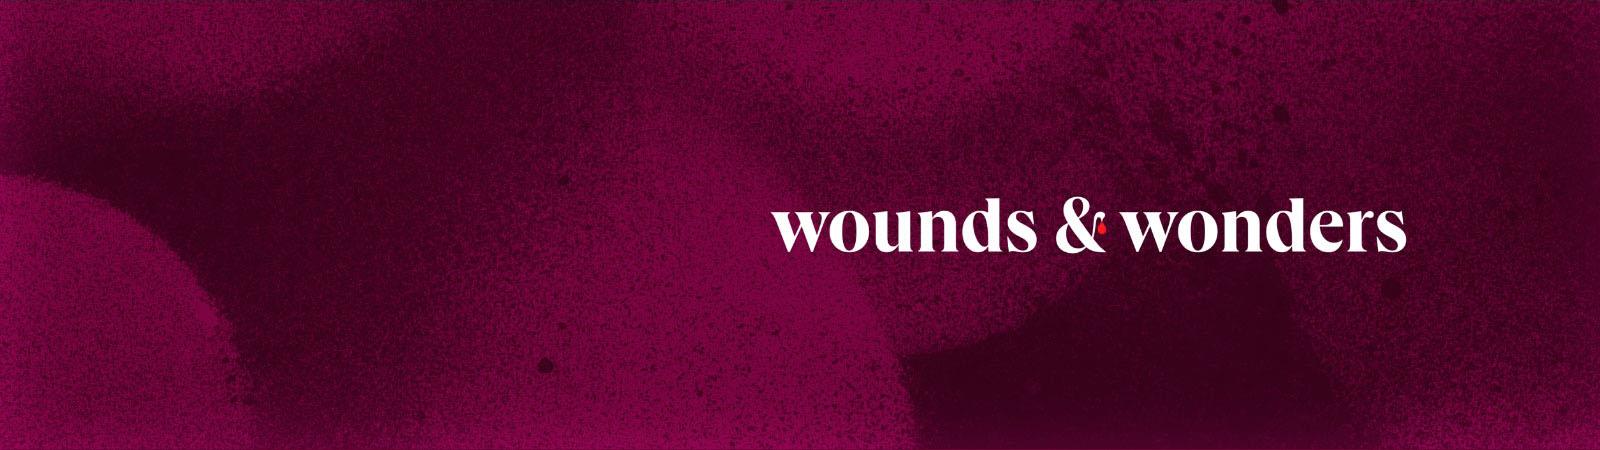 Wounds & Wonders